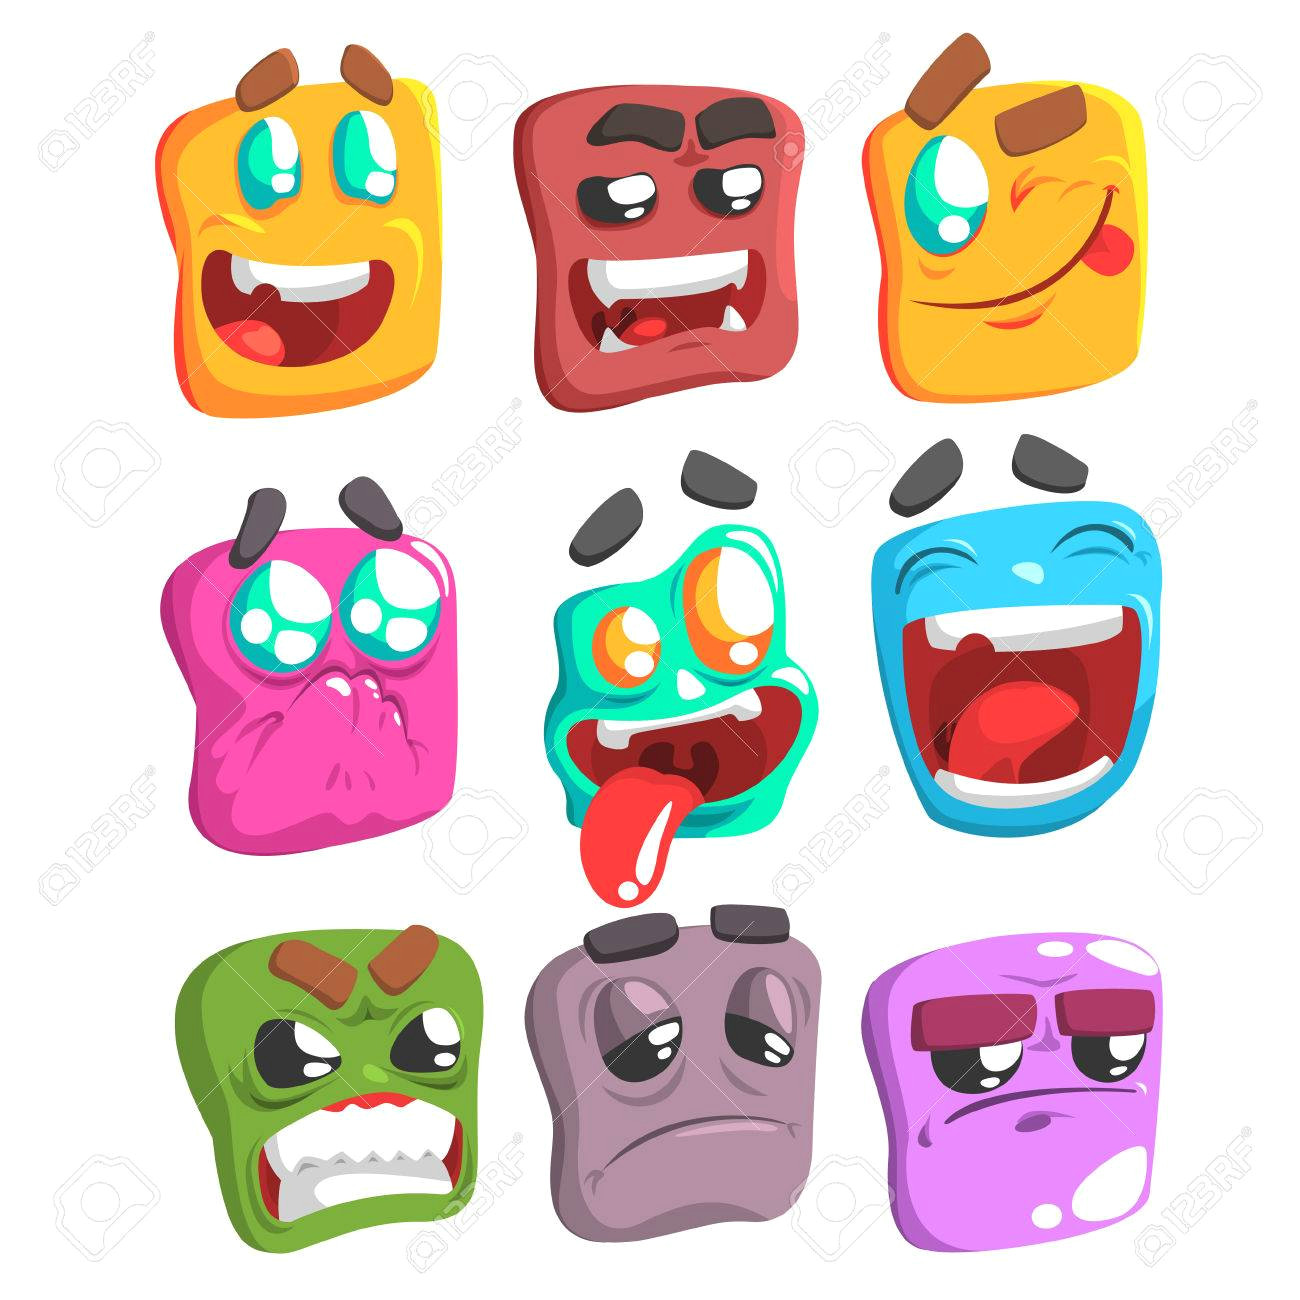 Drawings Easy Emoji Square Face Colorful Emoji Set Od isolated Icons On White Background